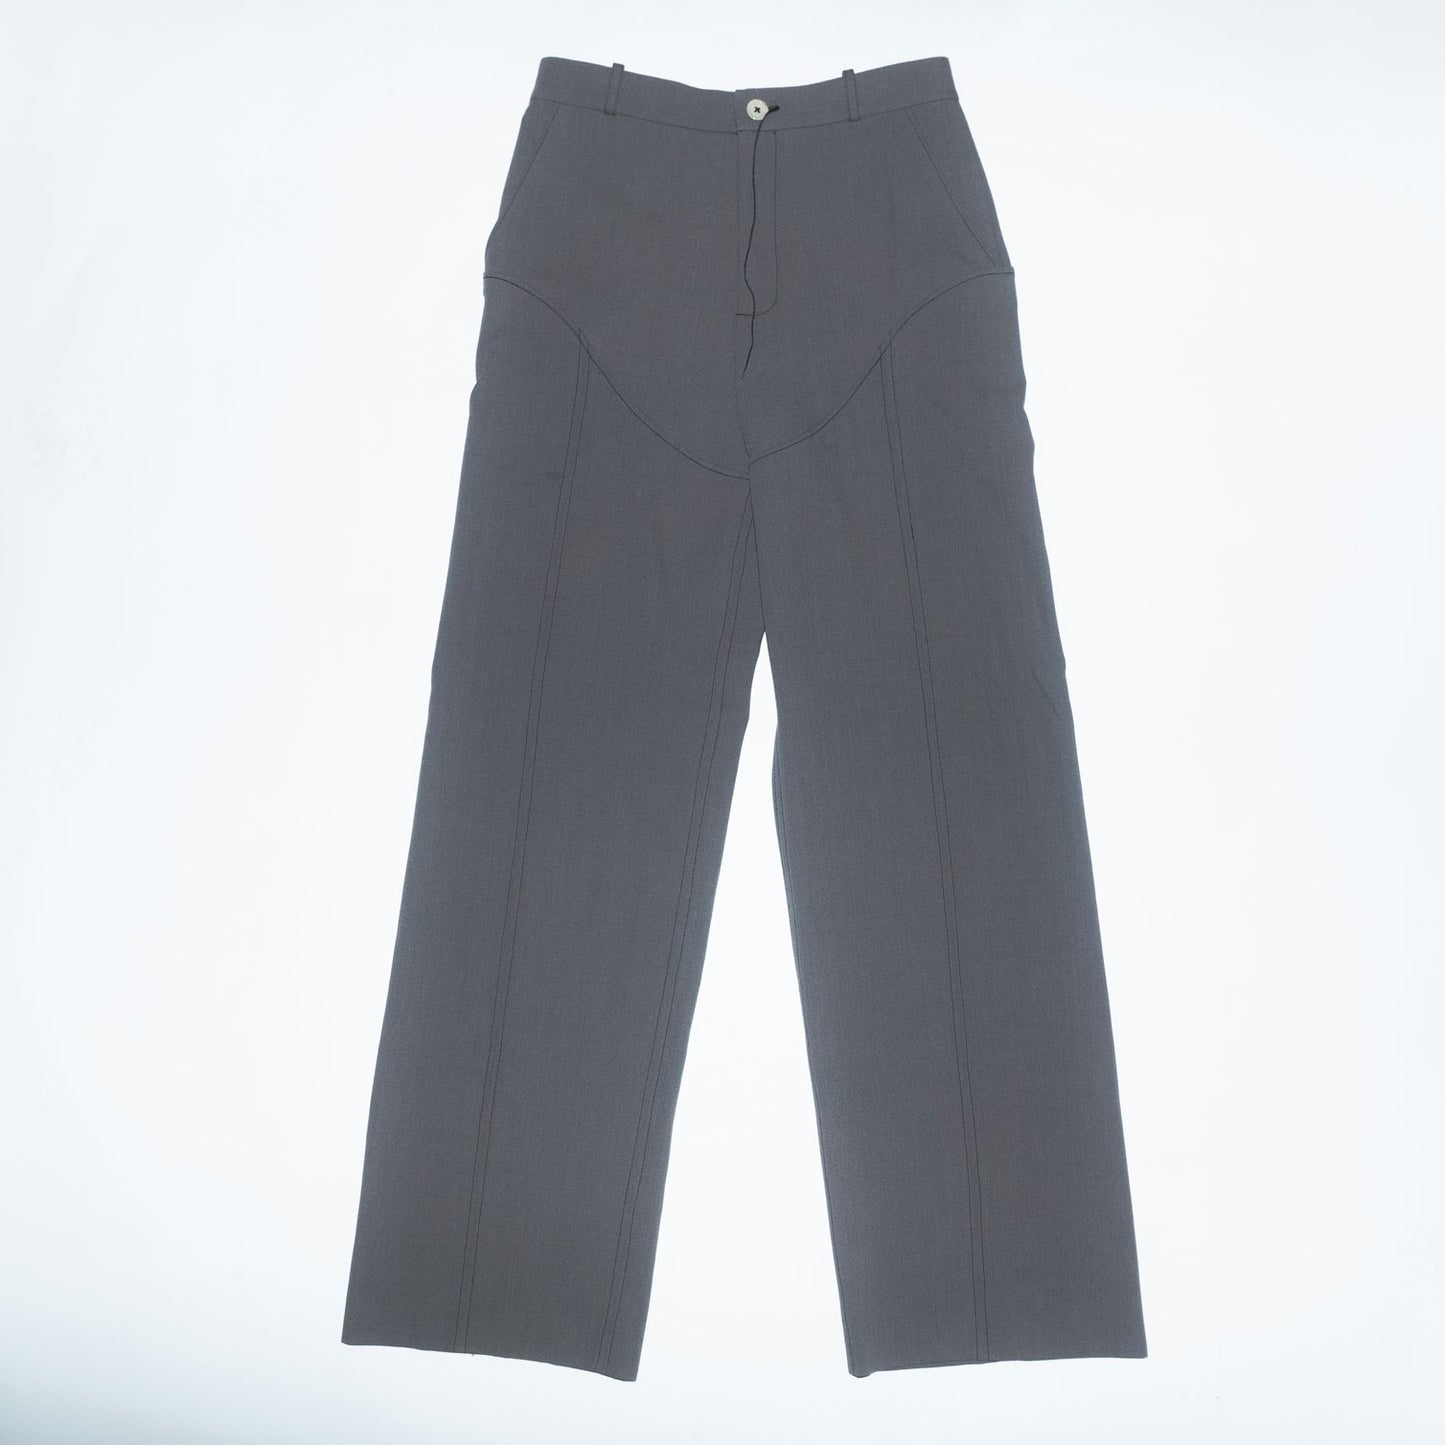 Archive Python Panelled Trousers in Light Brown Wool